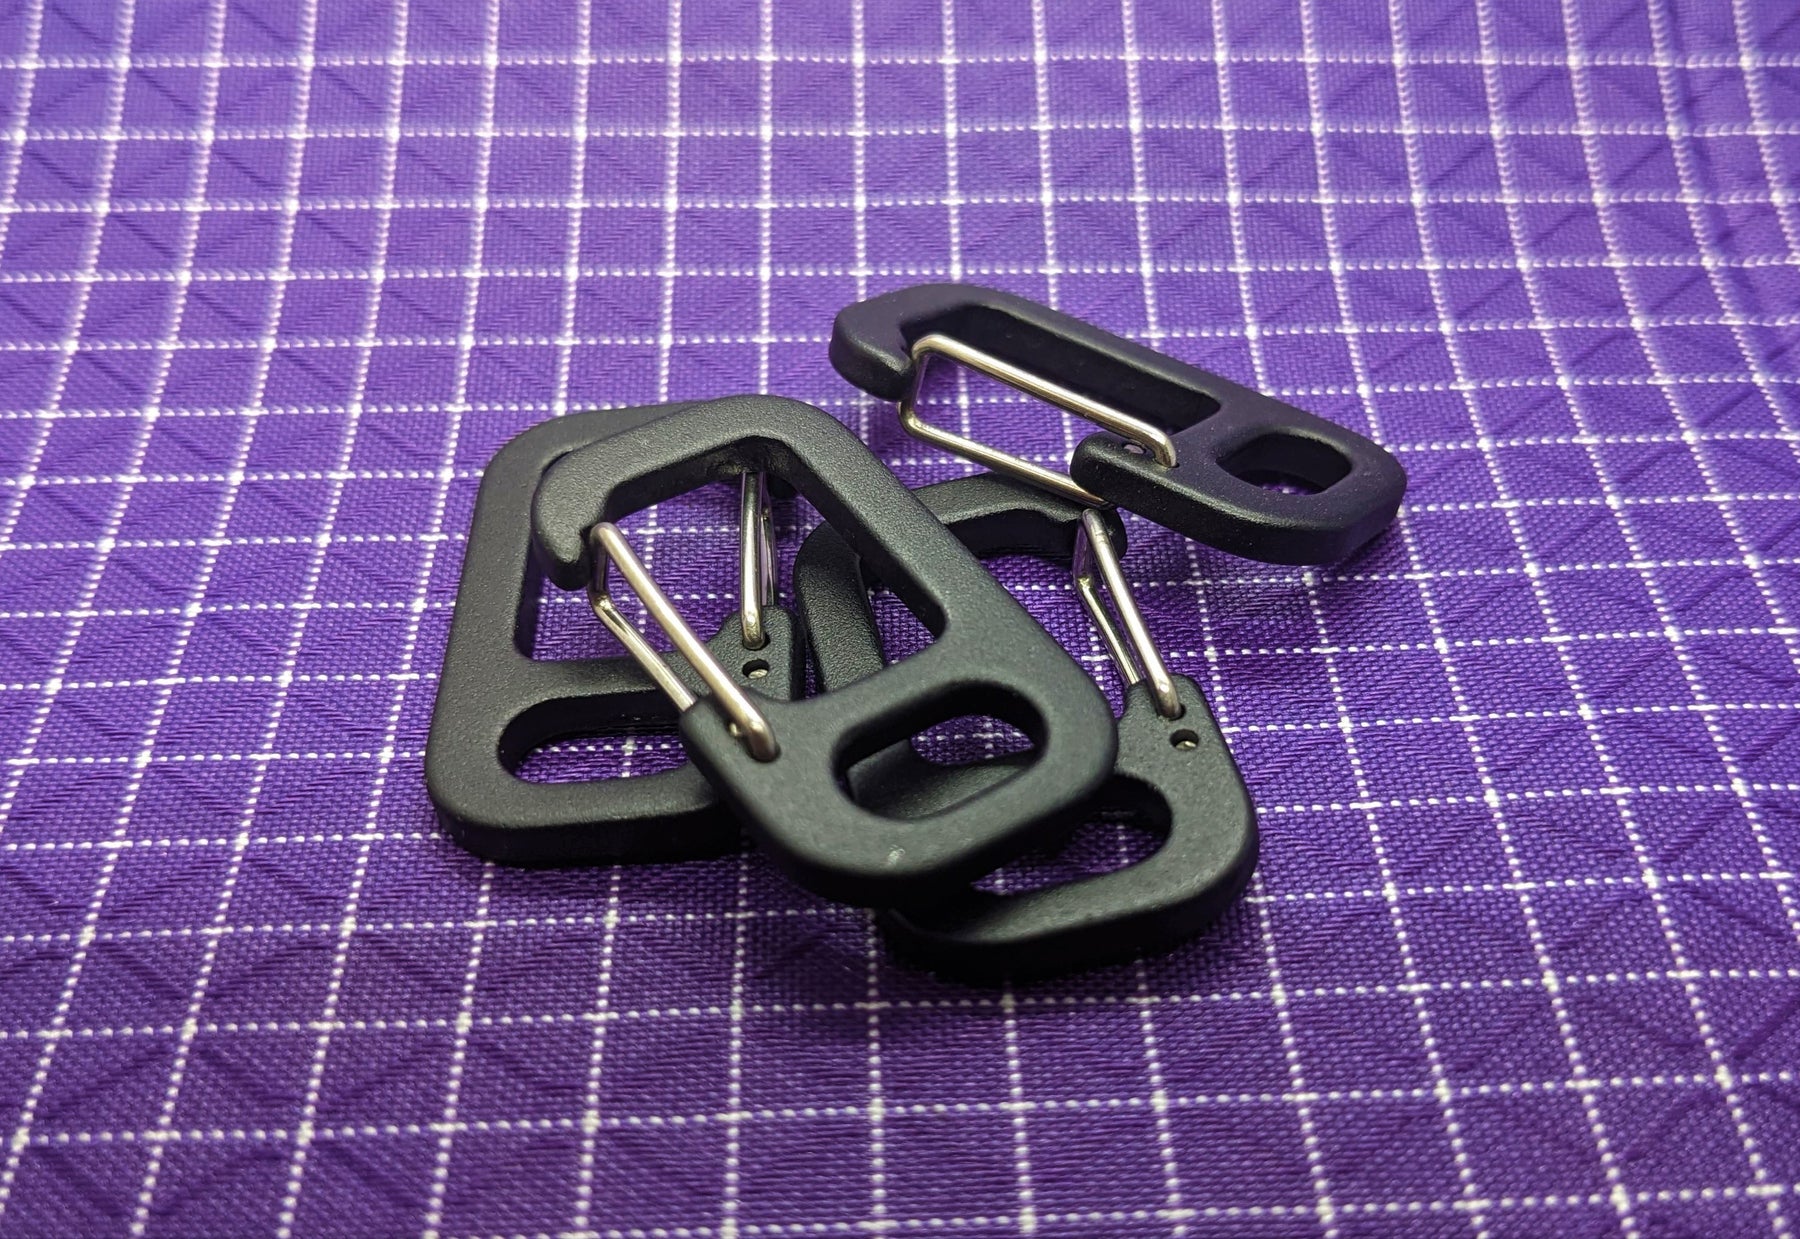 These WeTOOL mini clip hooks are very popular among backpack and fanny pack makers. They can be a great addition to the inside of a zippered pocket, allowing you to clip your keys or other small items too!